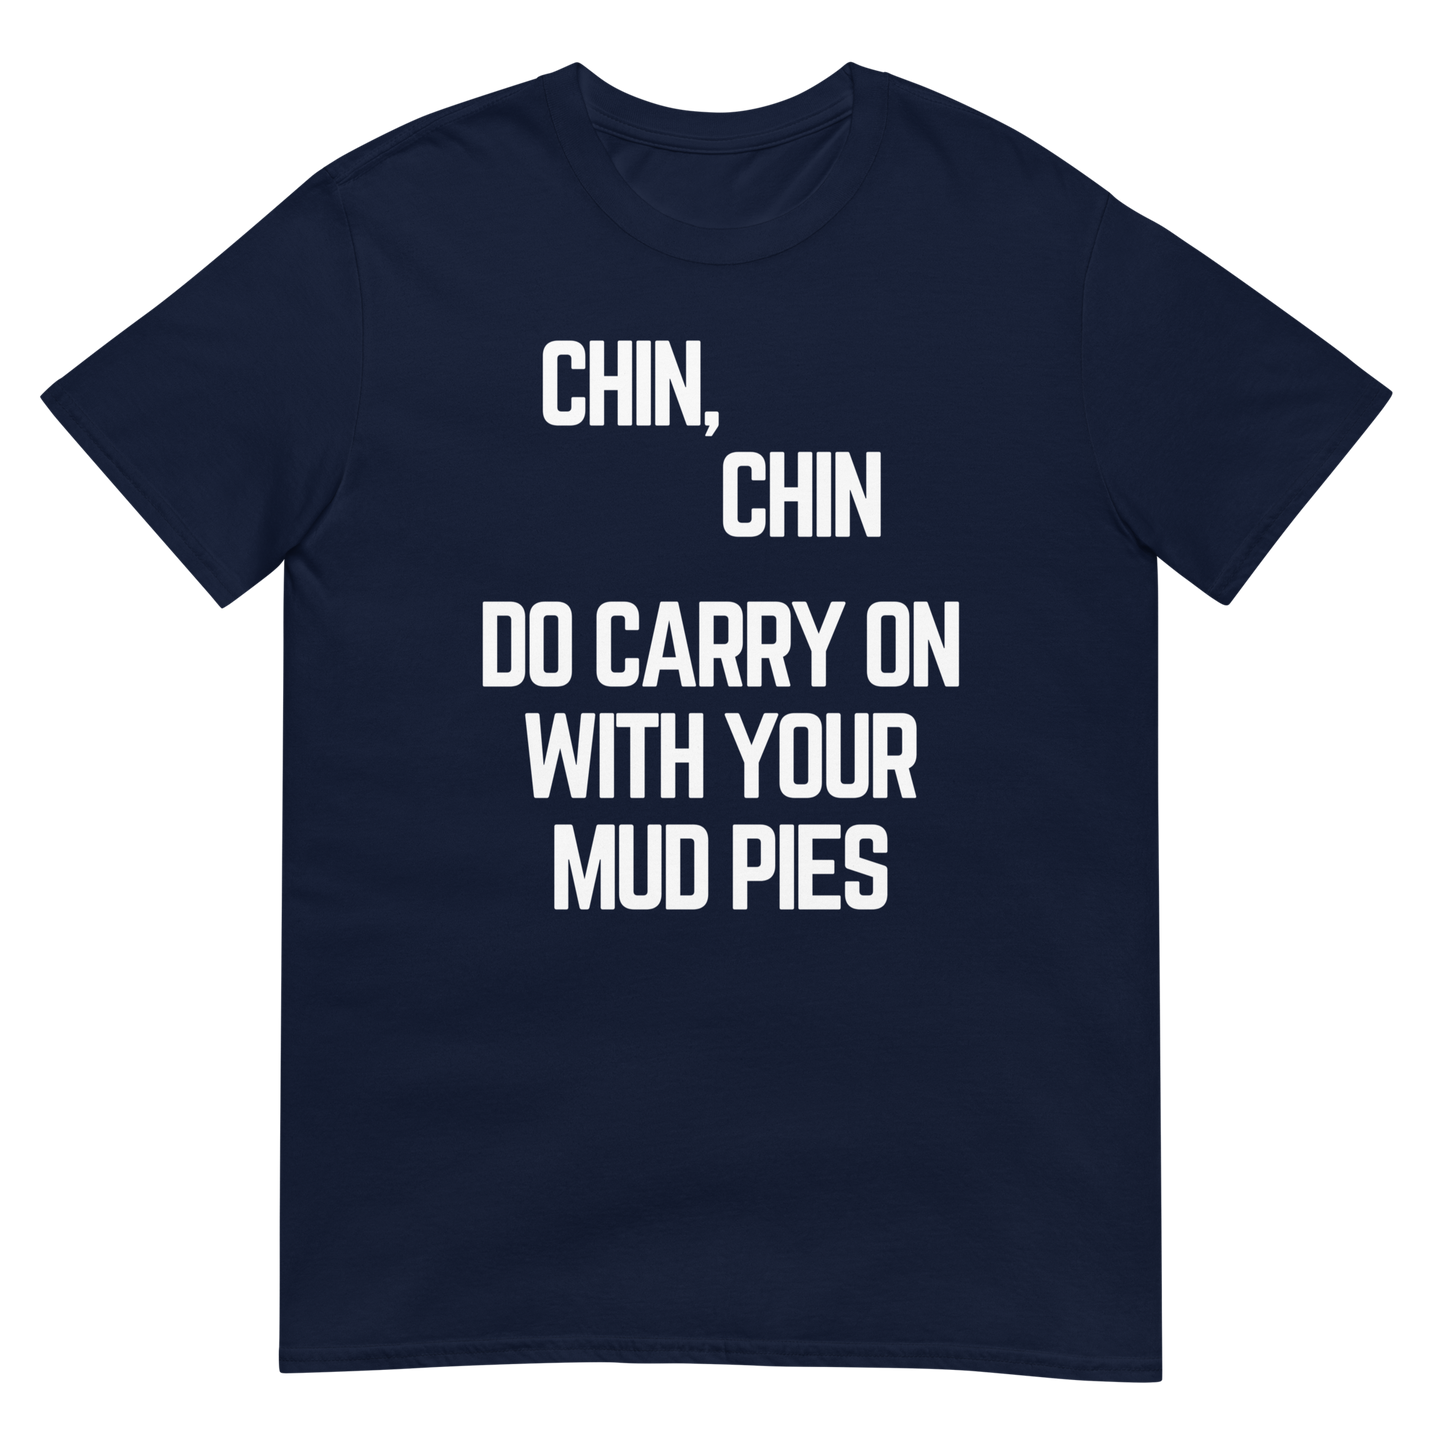 Chin, Chin, Do Carry On With Your Mud Pies. (t-shirt)